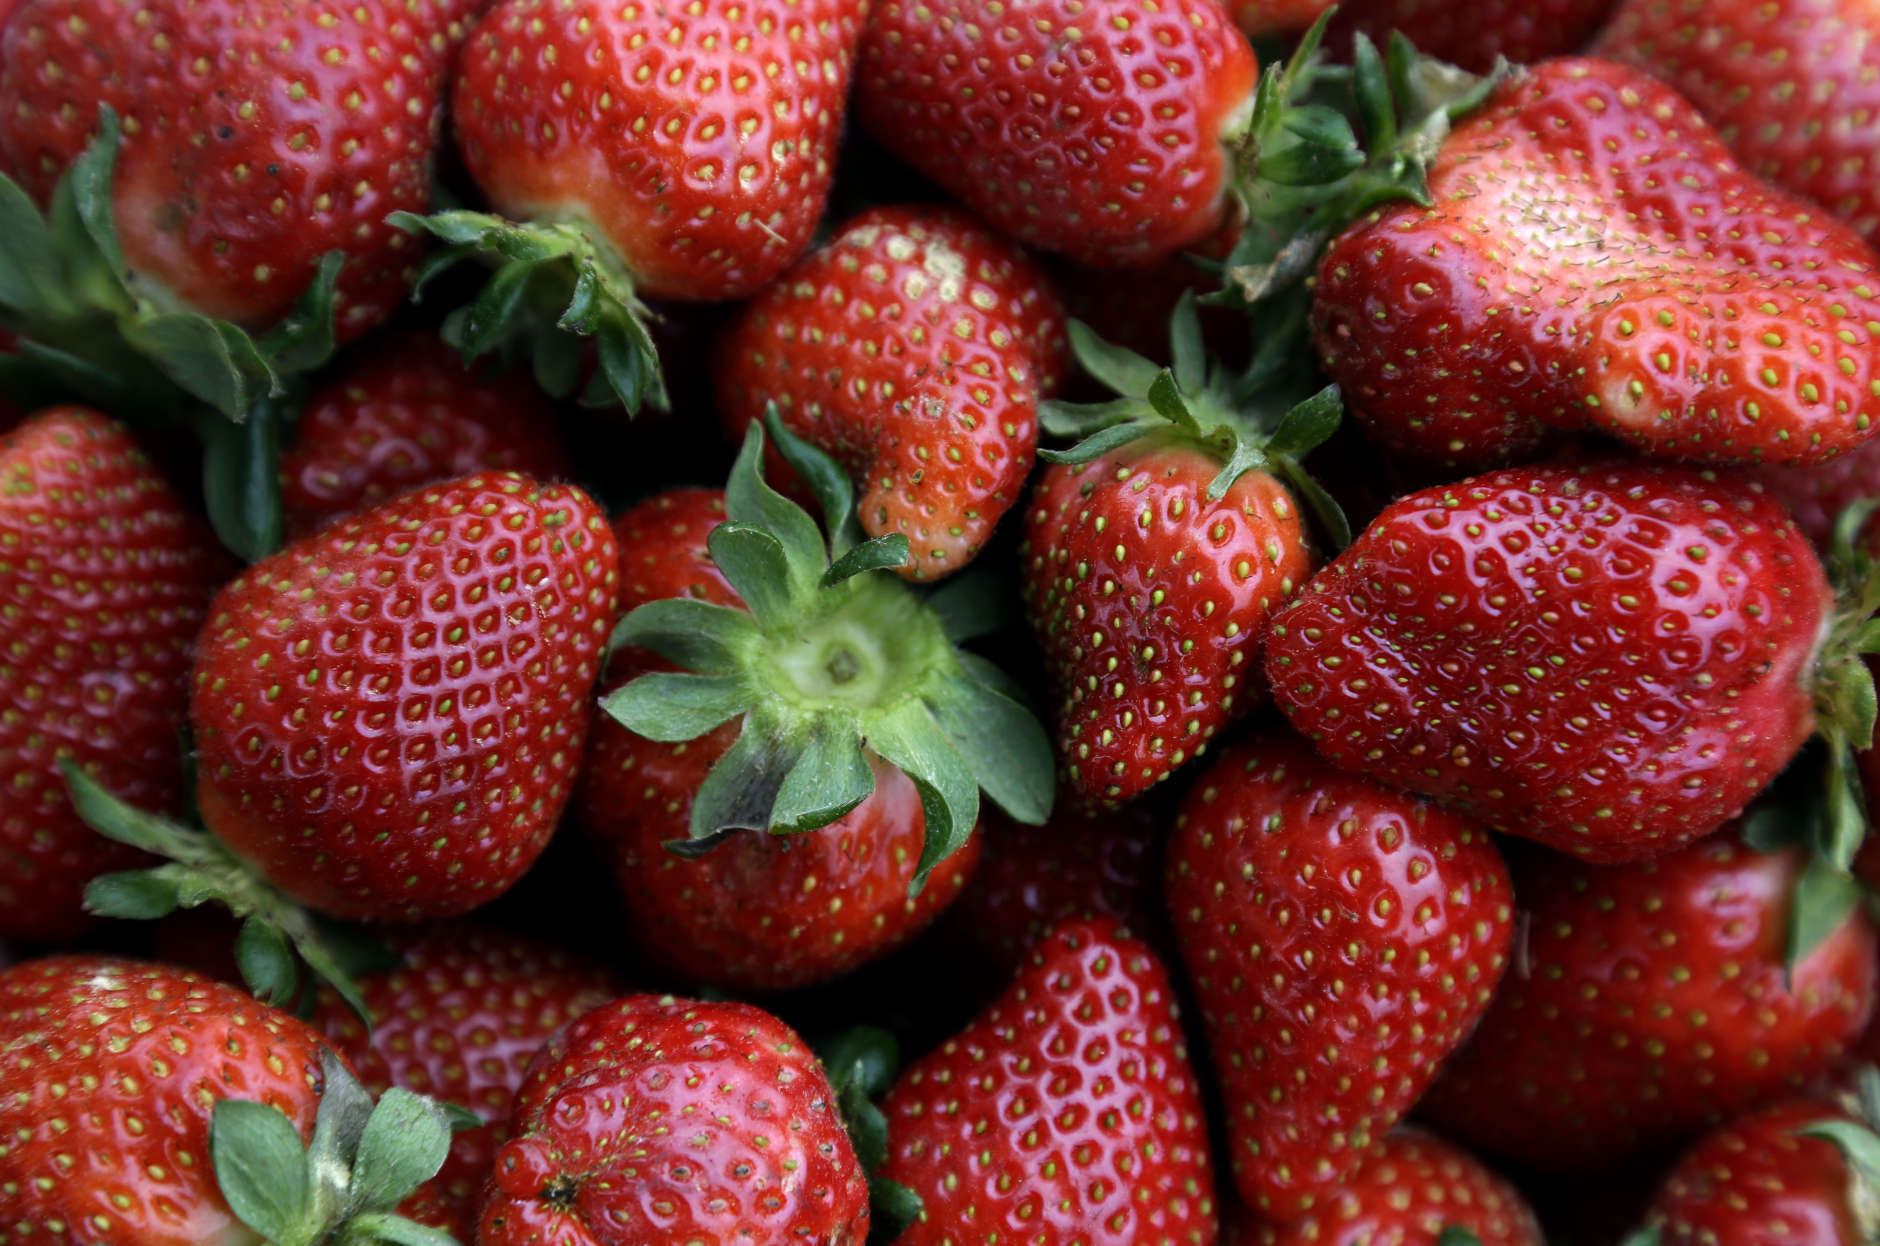 A basket of fresh picked strawberries are shown in the berry field at Oakley Farm in Chapel Hill, N.C., Thursday, May 2, 2013. The season is ripe for picking fresh strawberries in some parts of North Carolina, one of the largest strawberry producing states in the country. Owner David Oakley has roughly 26,000 strawberry plants to harvest from his field. (AP Photo/Gerry Broome)